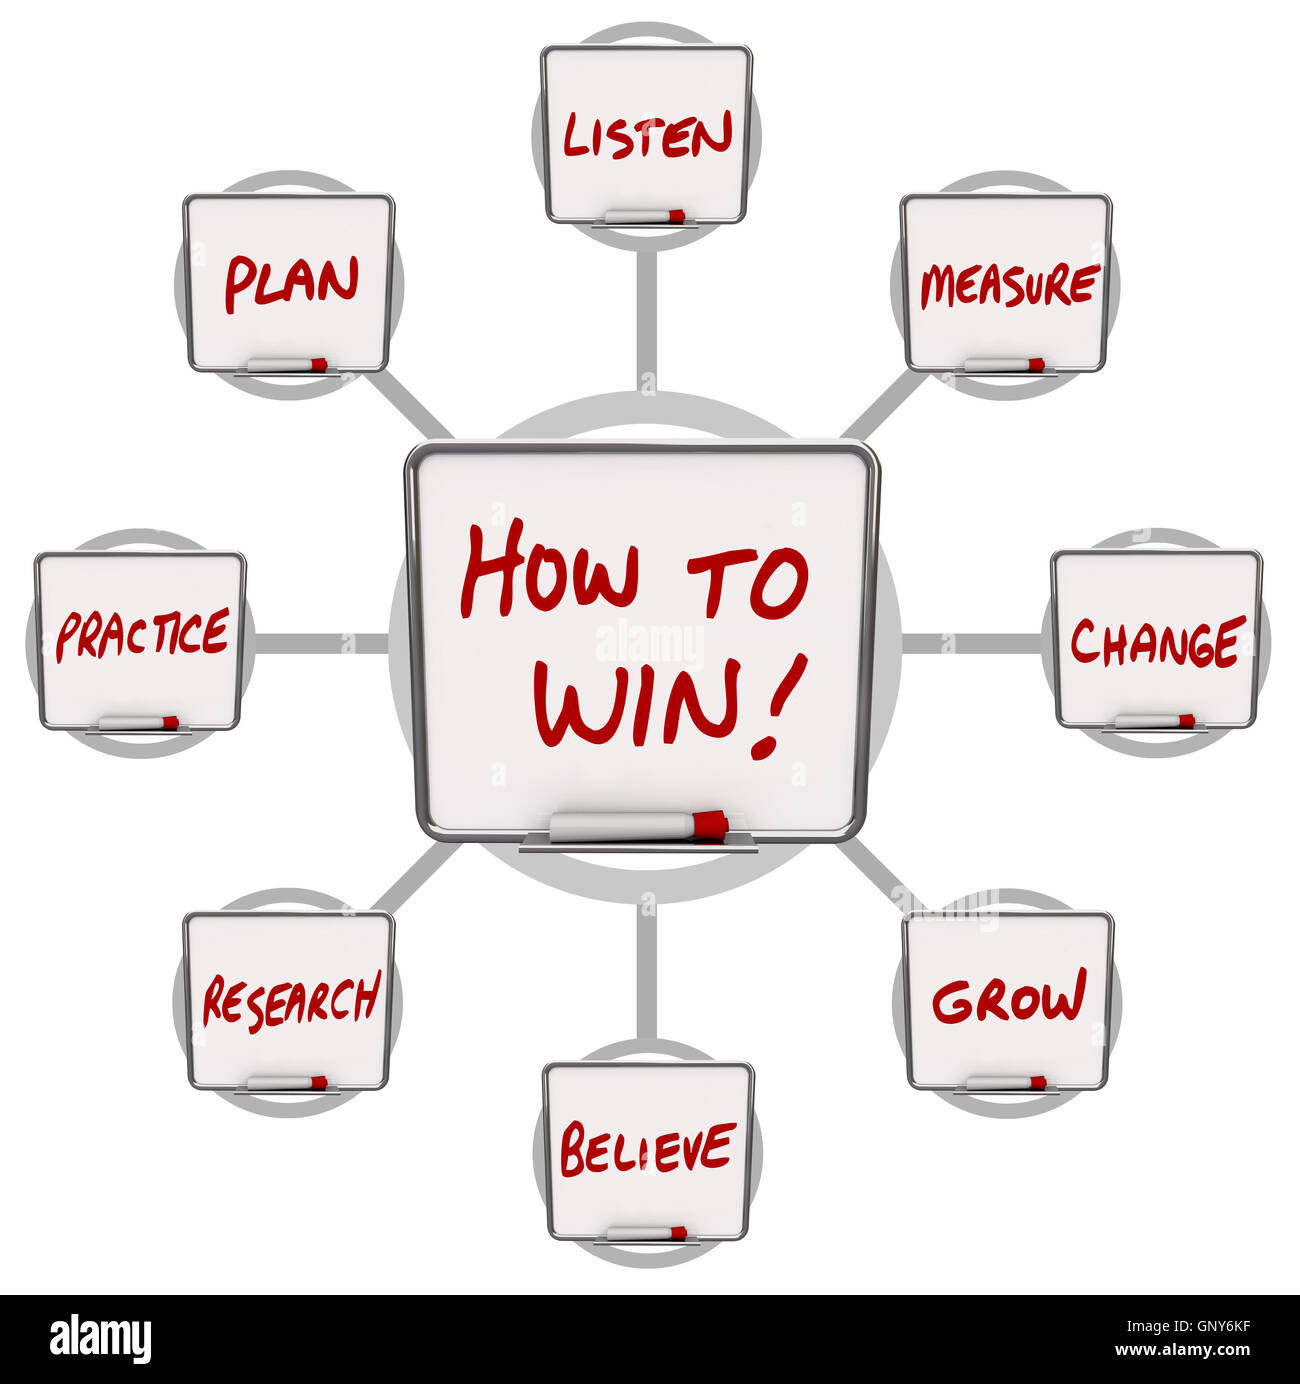 Practice plan. How to win win win. Win to win картинки. Книга how to win win win. Instruction illustration.